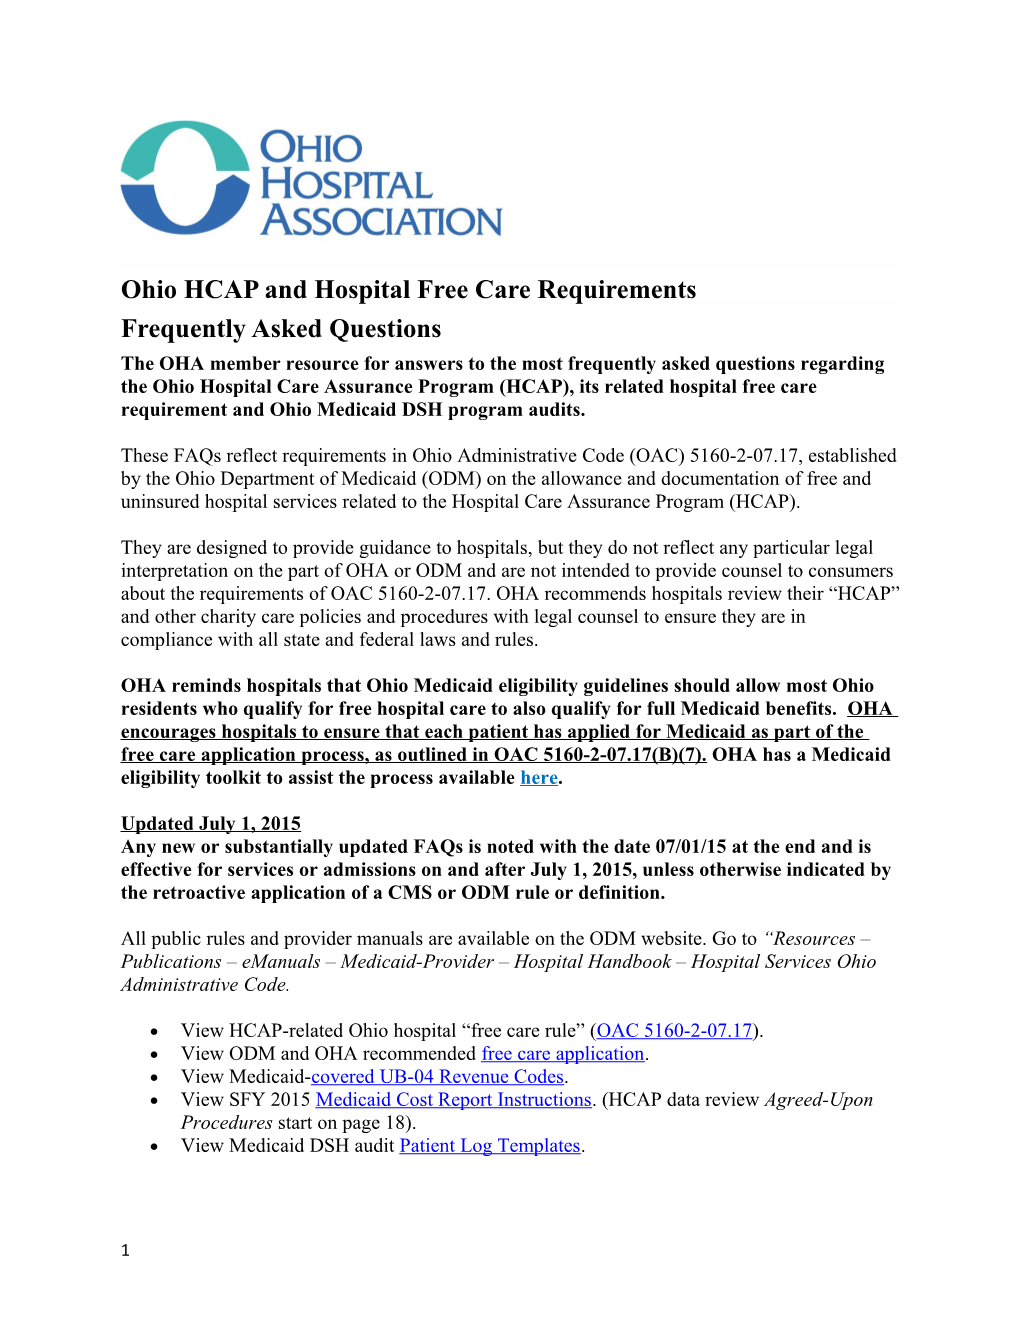 Ohio HCAP and Hospital Free Care Requirements